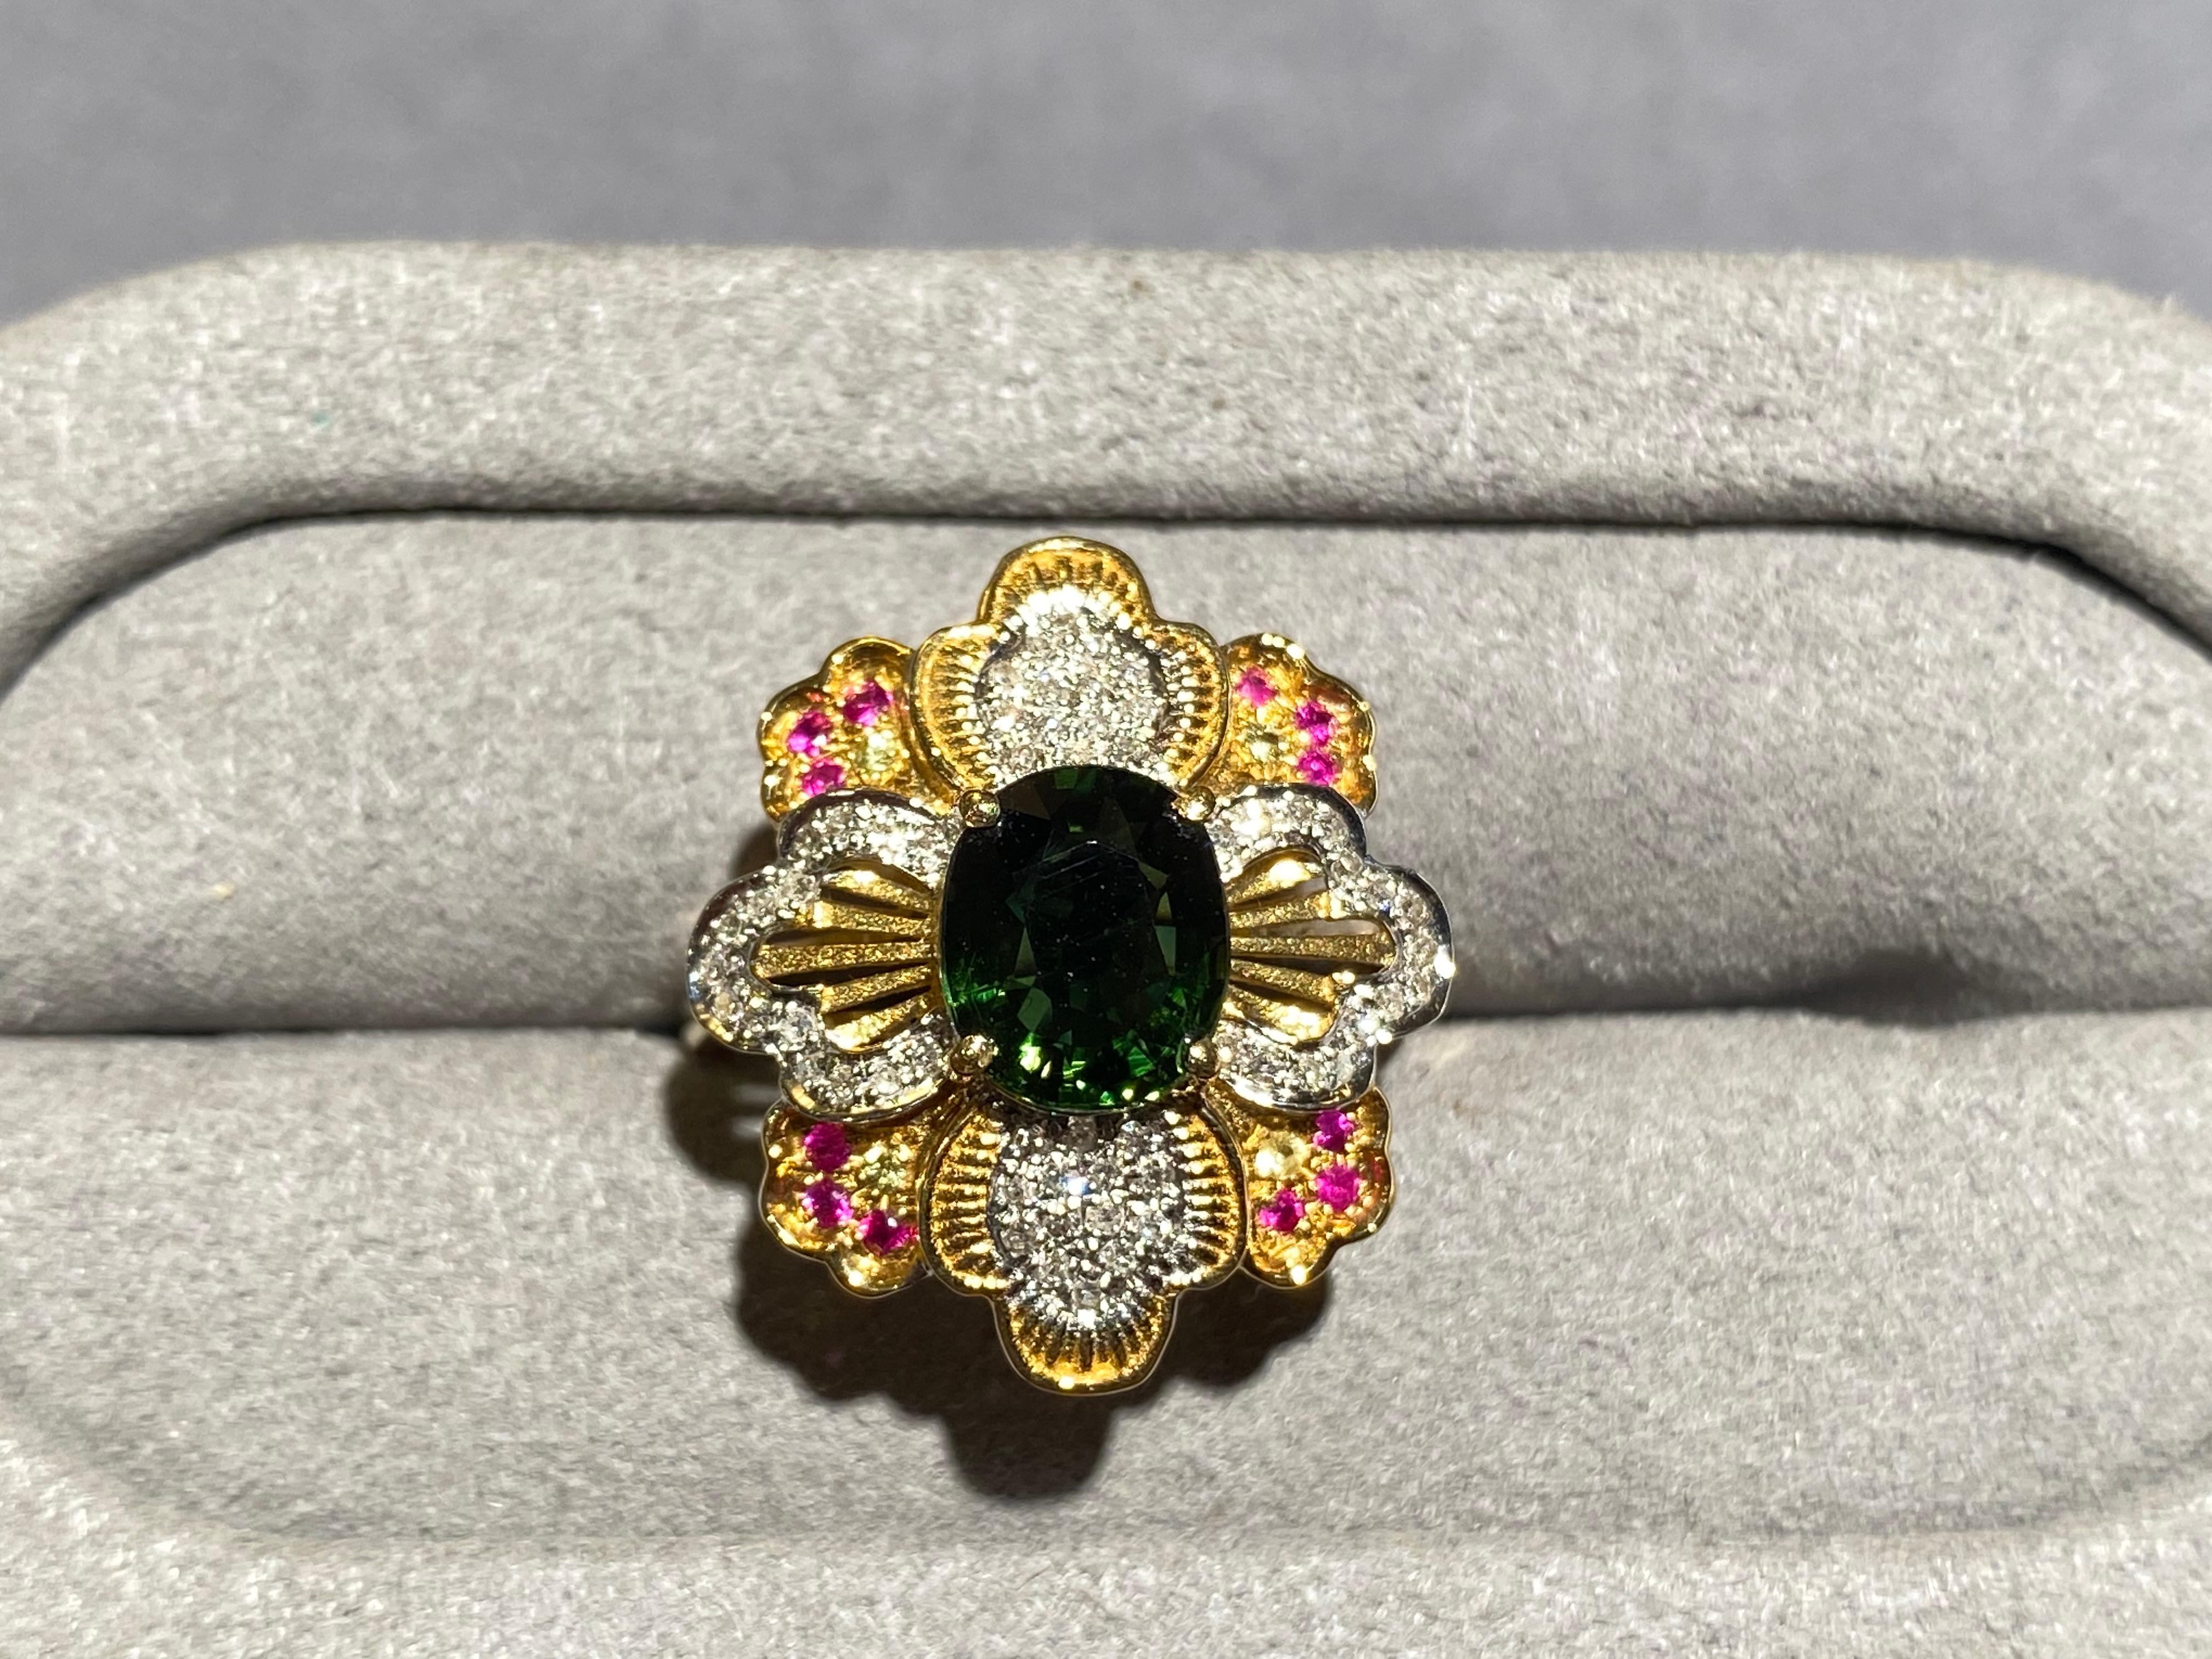 A green tourmaline and diamond ring in 18k yellow gold. The green tourmaline is set in the middle of a 8 petals flower motif. On the first layer there are 4 petals, each of them is set with micro diamond pave. The petals in the bottom layer is